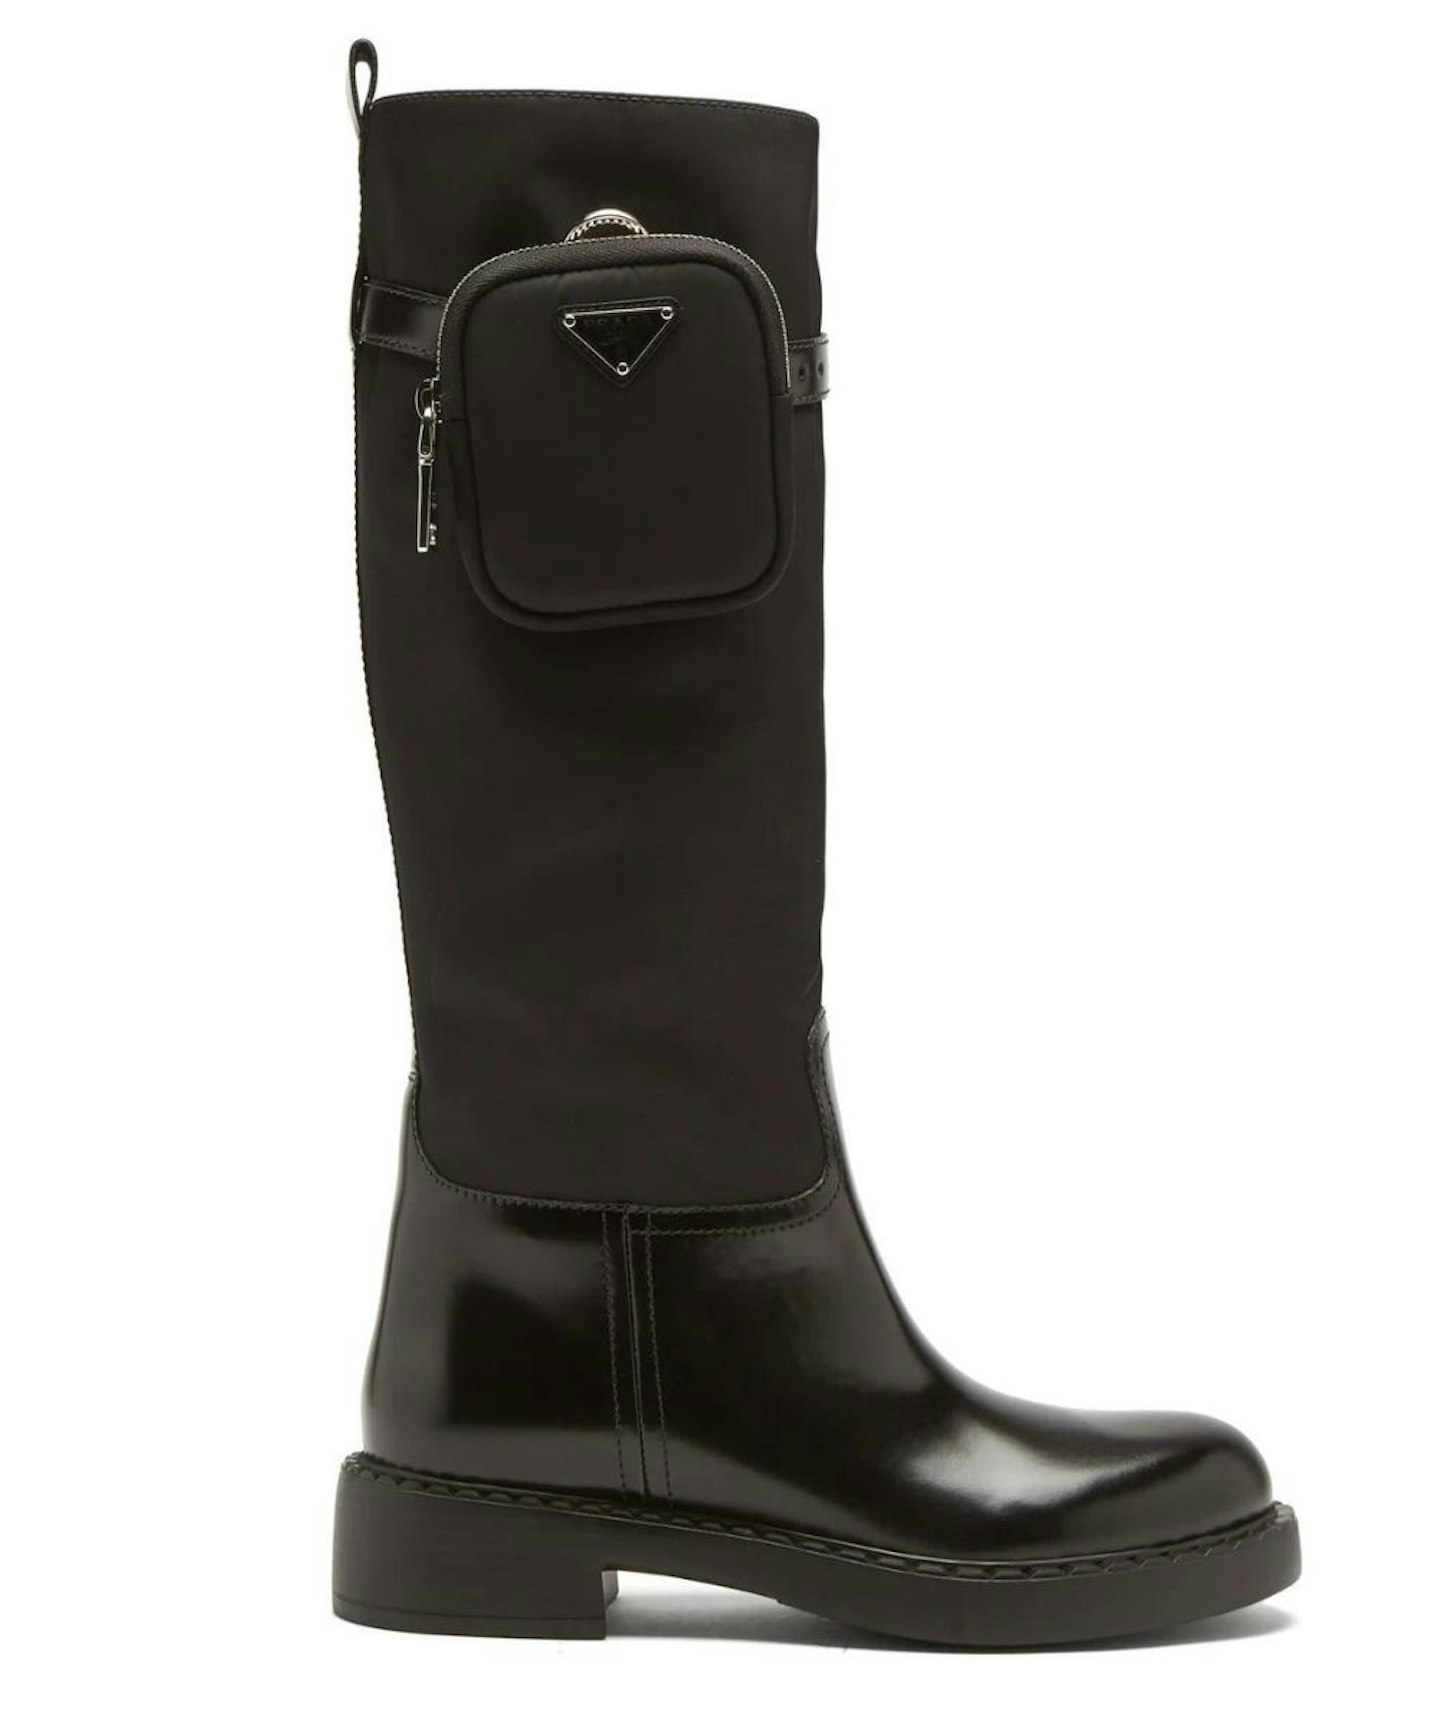 Pouch Leather And Nylon Knee-High Boots, Prada